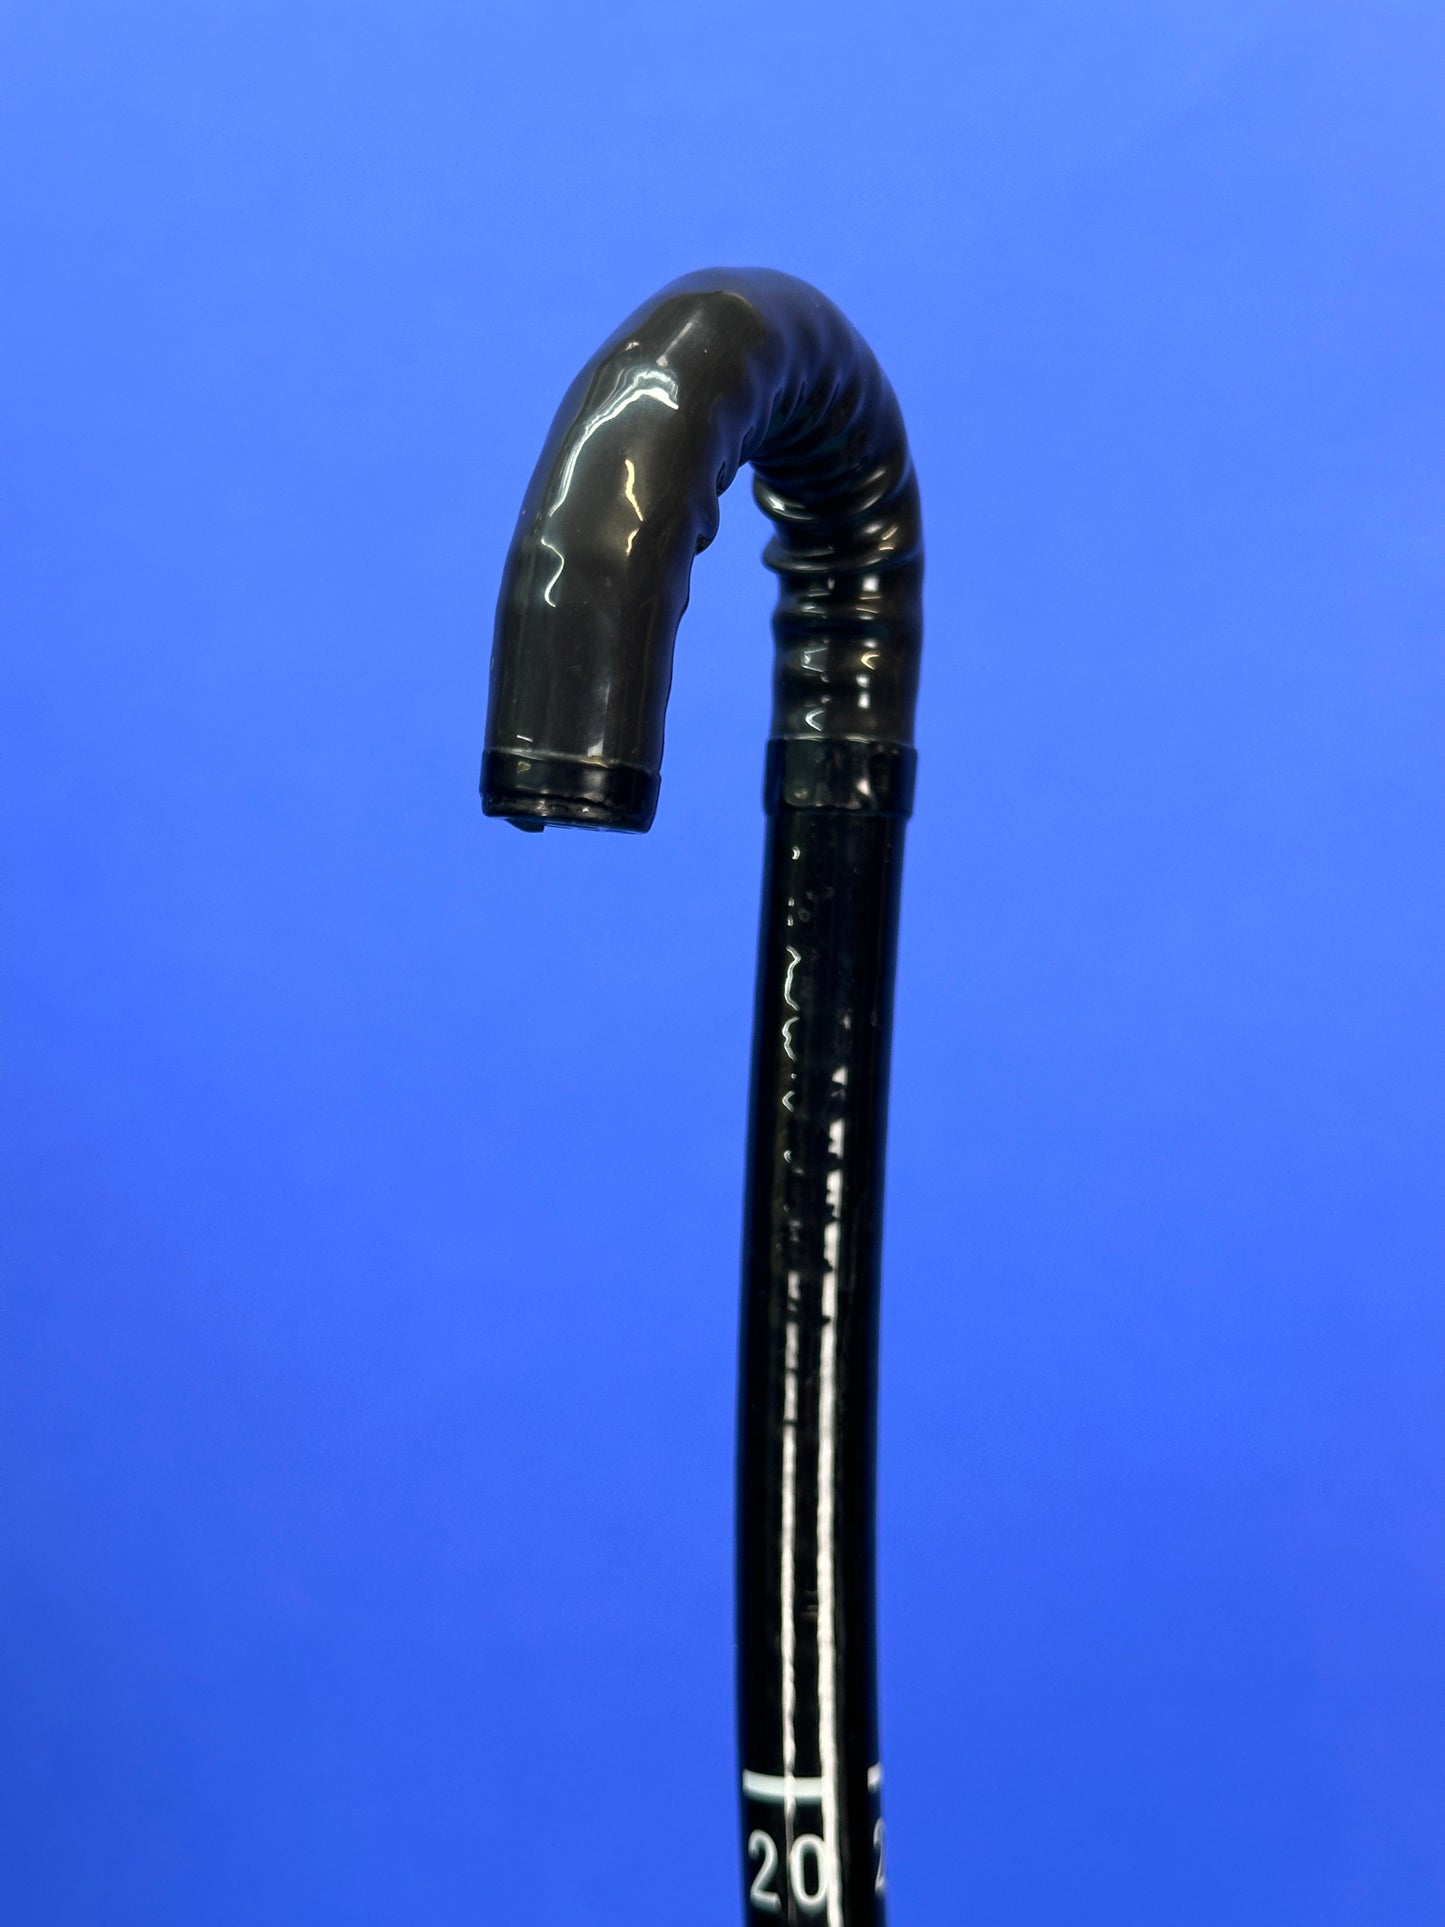 EC-530LP is a slim-type colonoscope with the distal end of 11.0 mm.